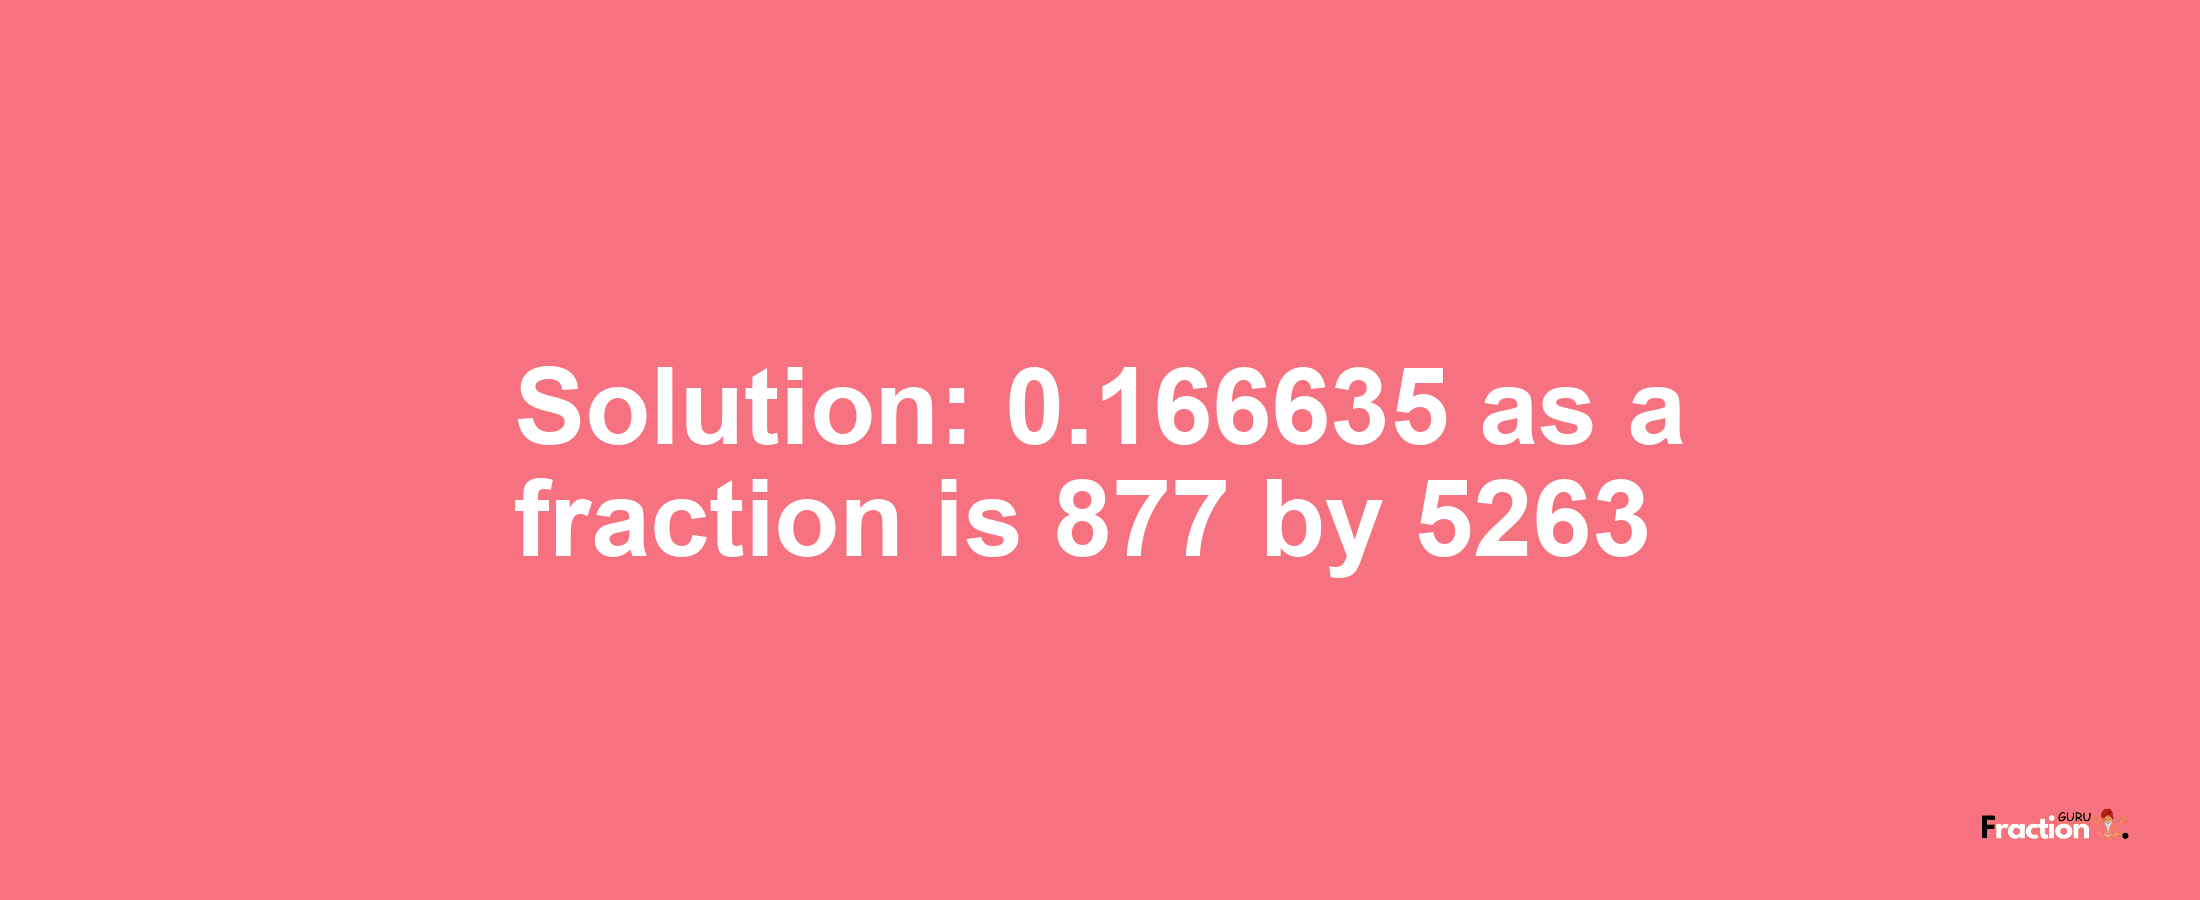 Solution:0.166635 as a fraction is 877/5263